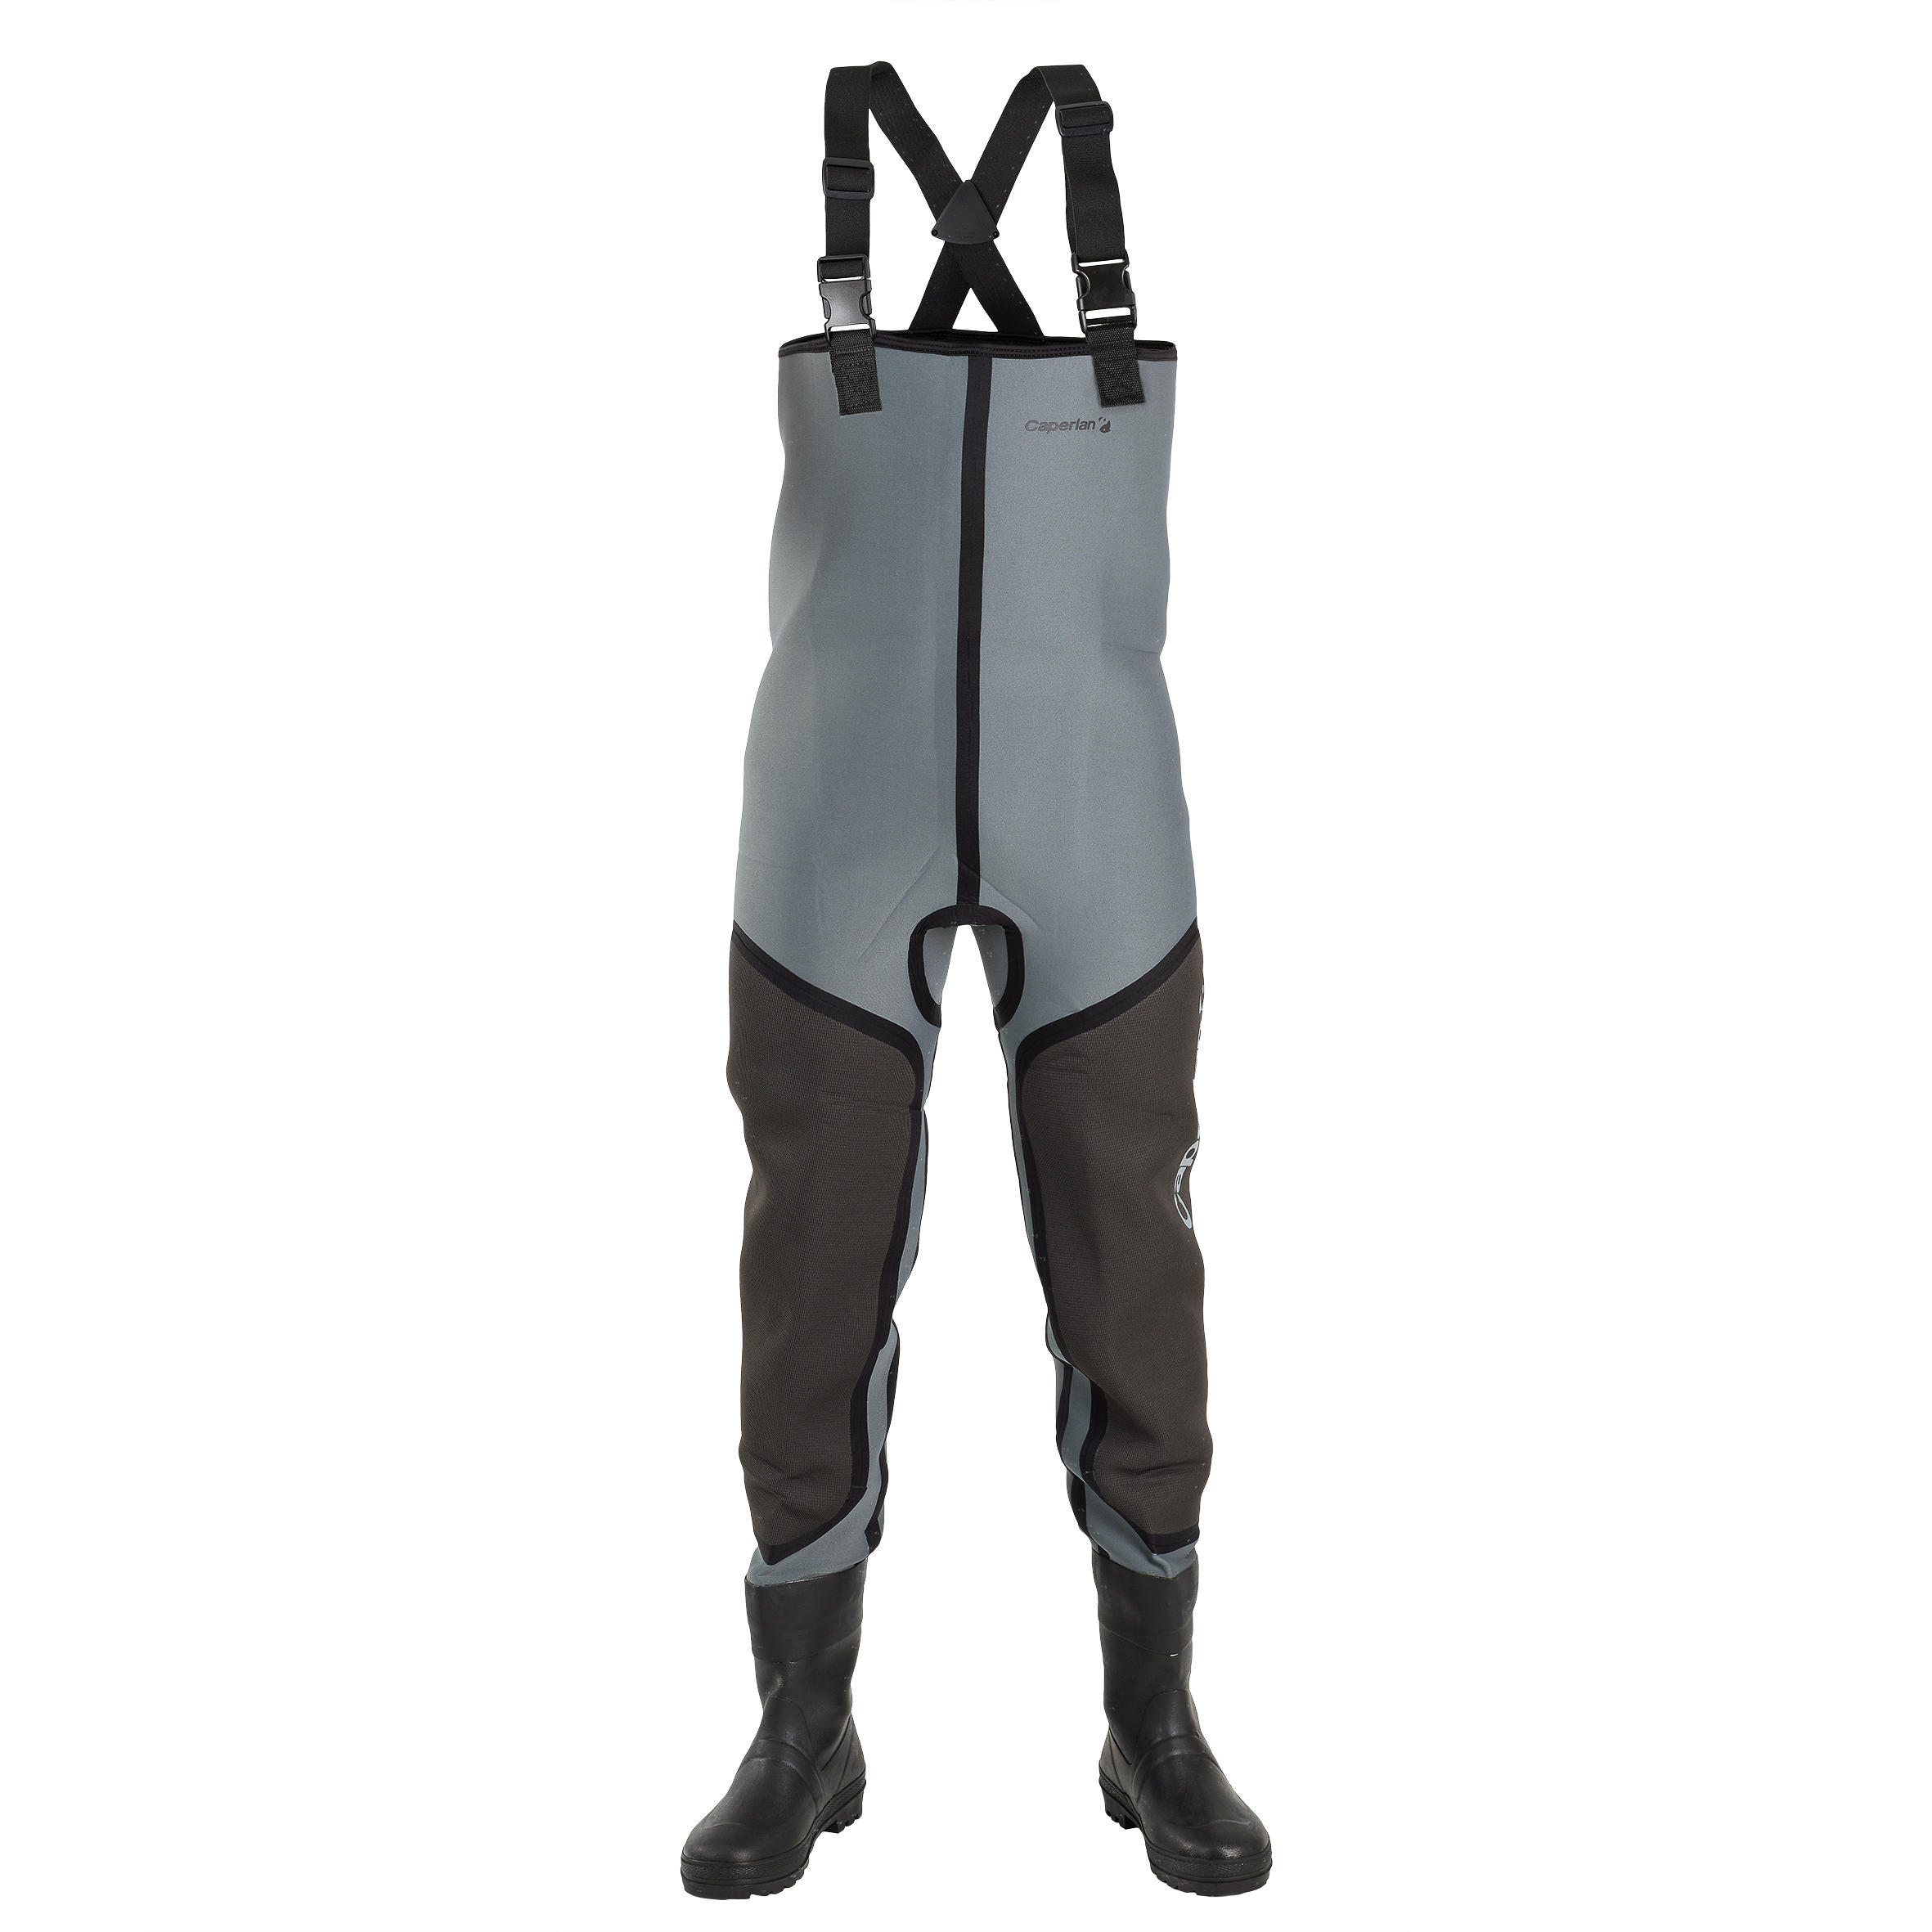 WDS-3 Thermo Fishing Waders - Magnet grey - Caperlan - Decathlon